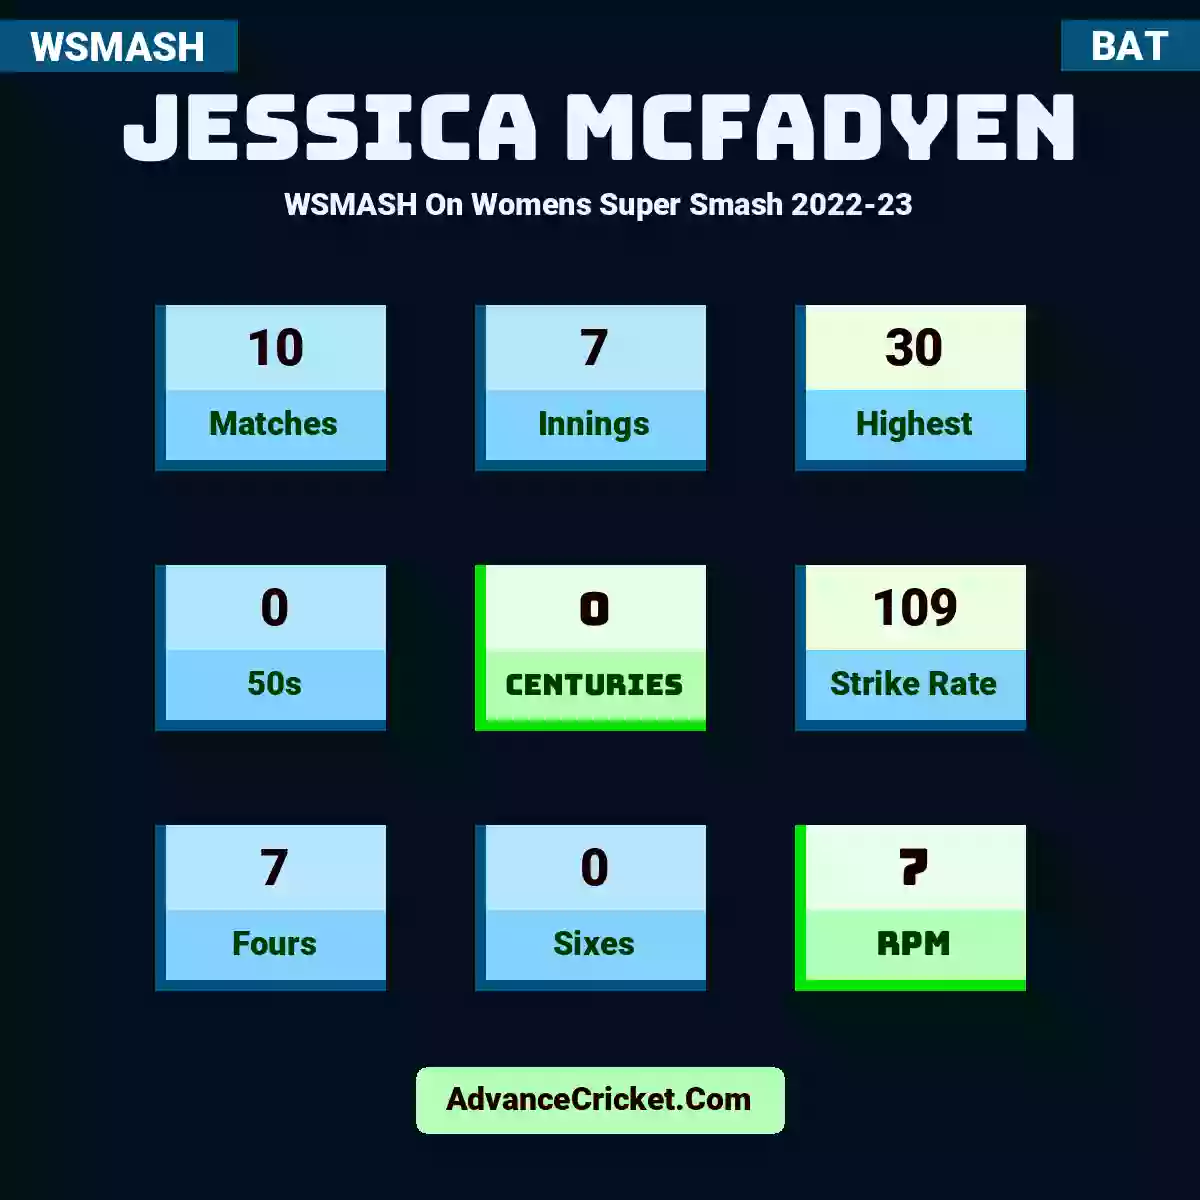 Jessica McFadyen WSMASH  On Womens Super Smash 2022-23, Jessica McFadyen played 10 matches, scored 30 runs as highest, 0 half-centuries, and 0 centuries, with a strike rate of 109. J.McFadyen hit 7 fours and 0 sixes, with an RPM of 7.